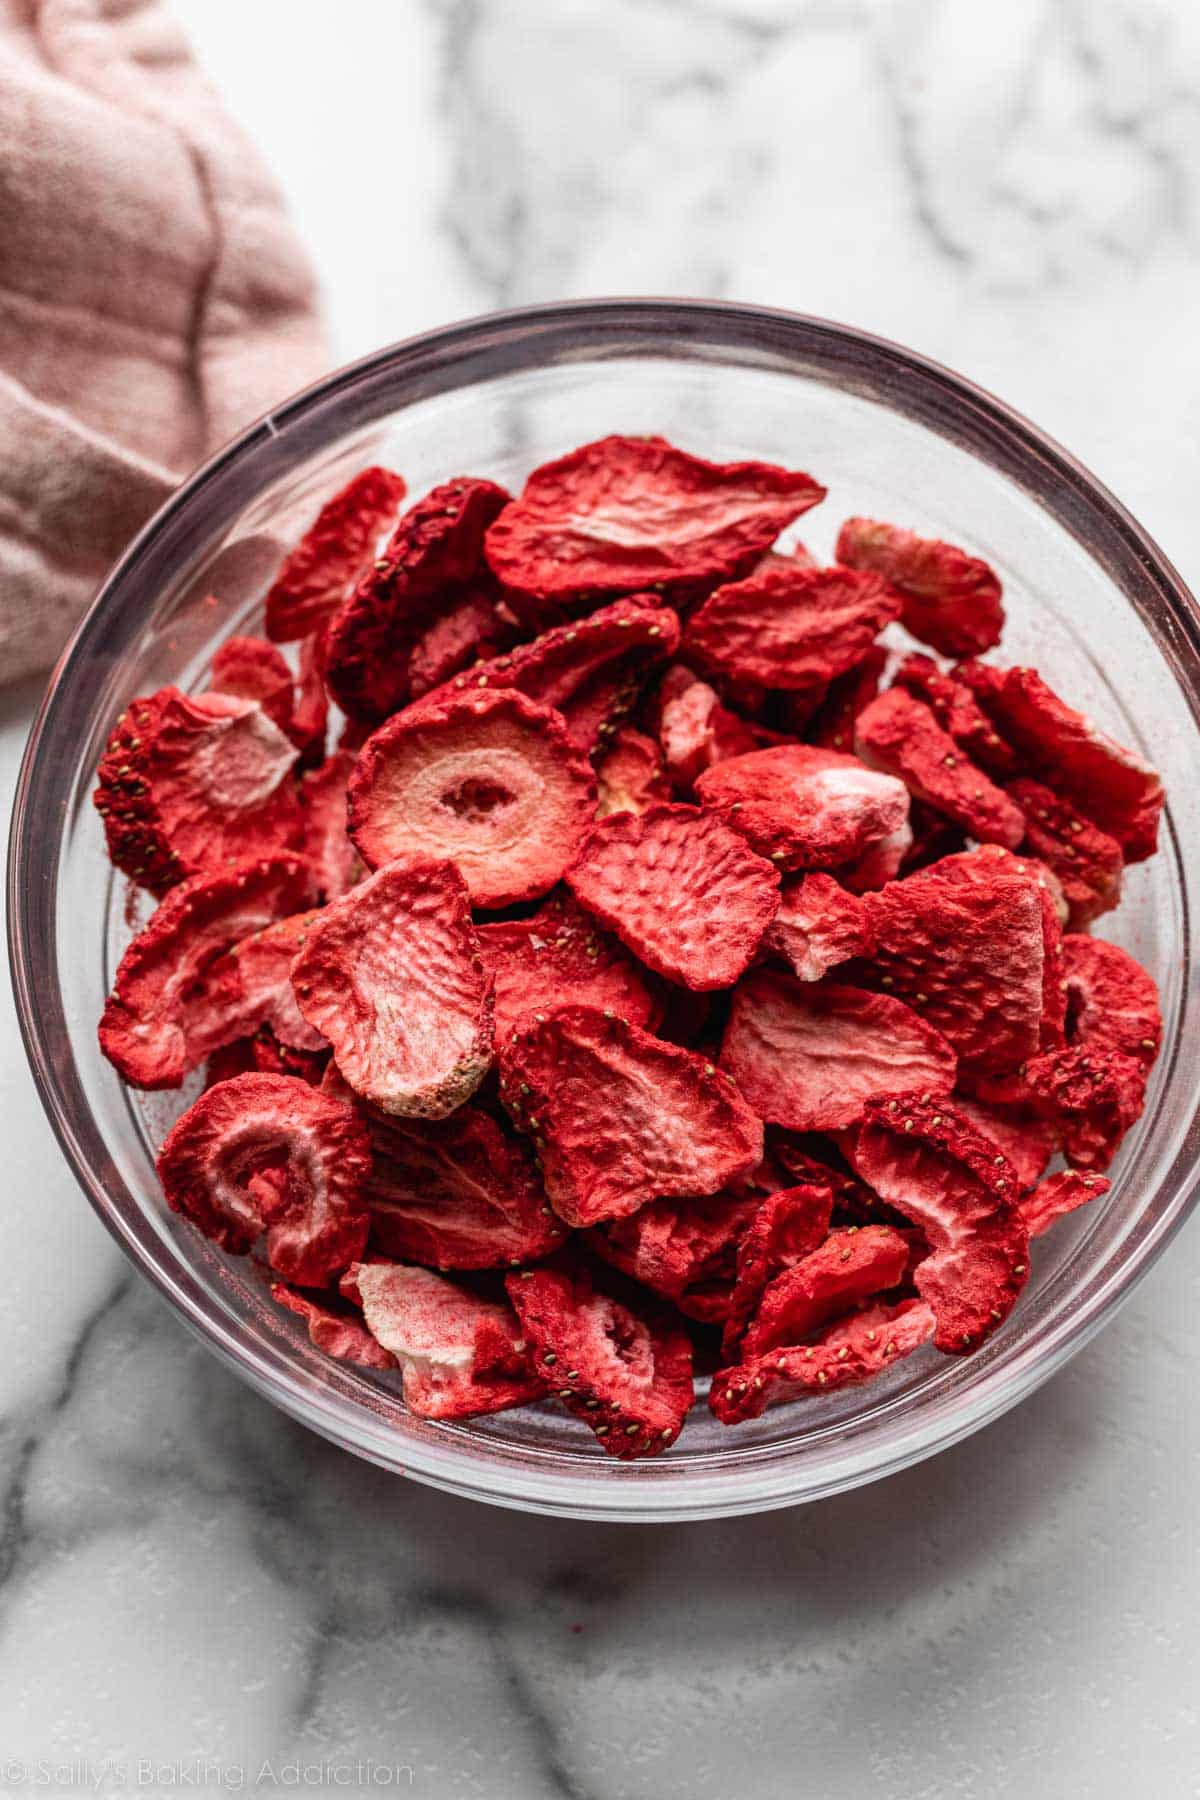 freeze-dried strawberries in glass bowl on marble counter.